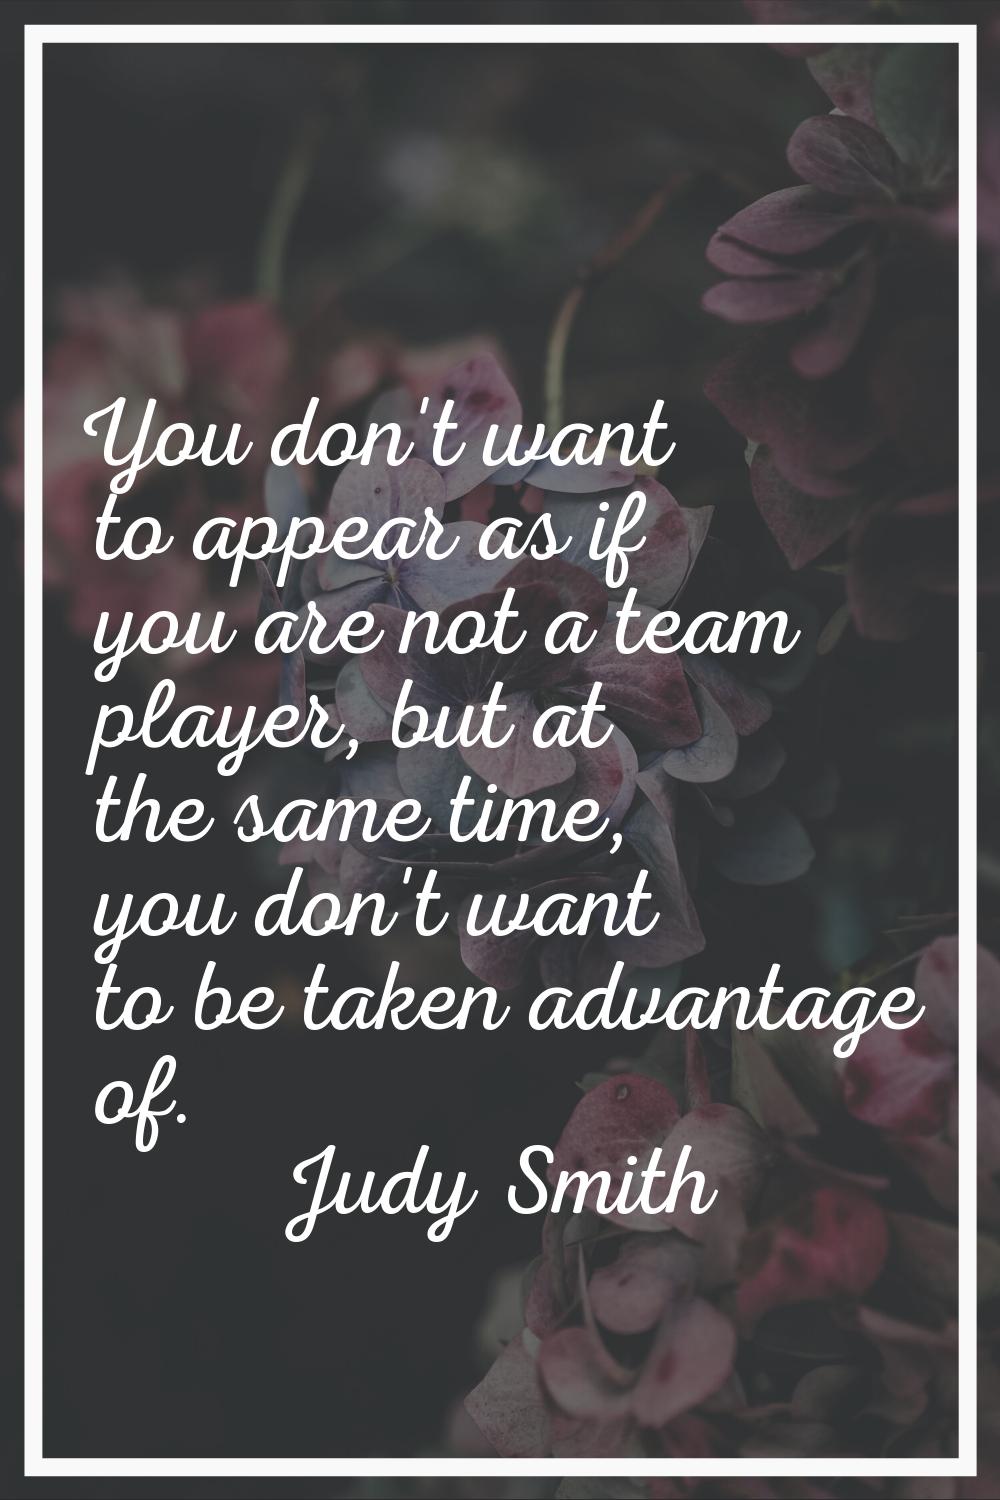 You don't want to appear as if you are not a team player, but at the same time, you don't want to b